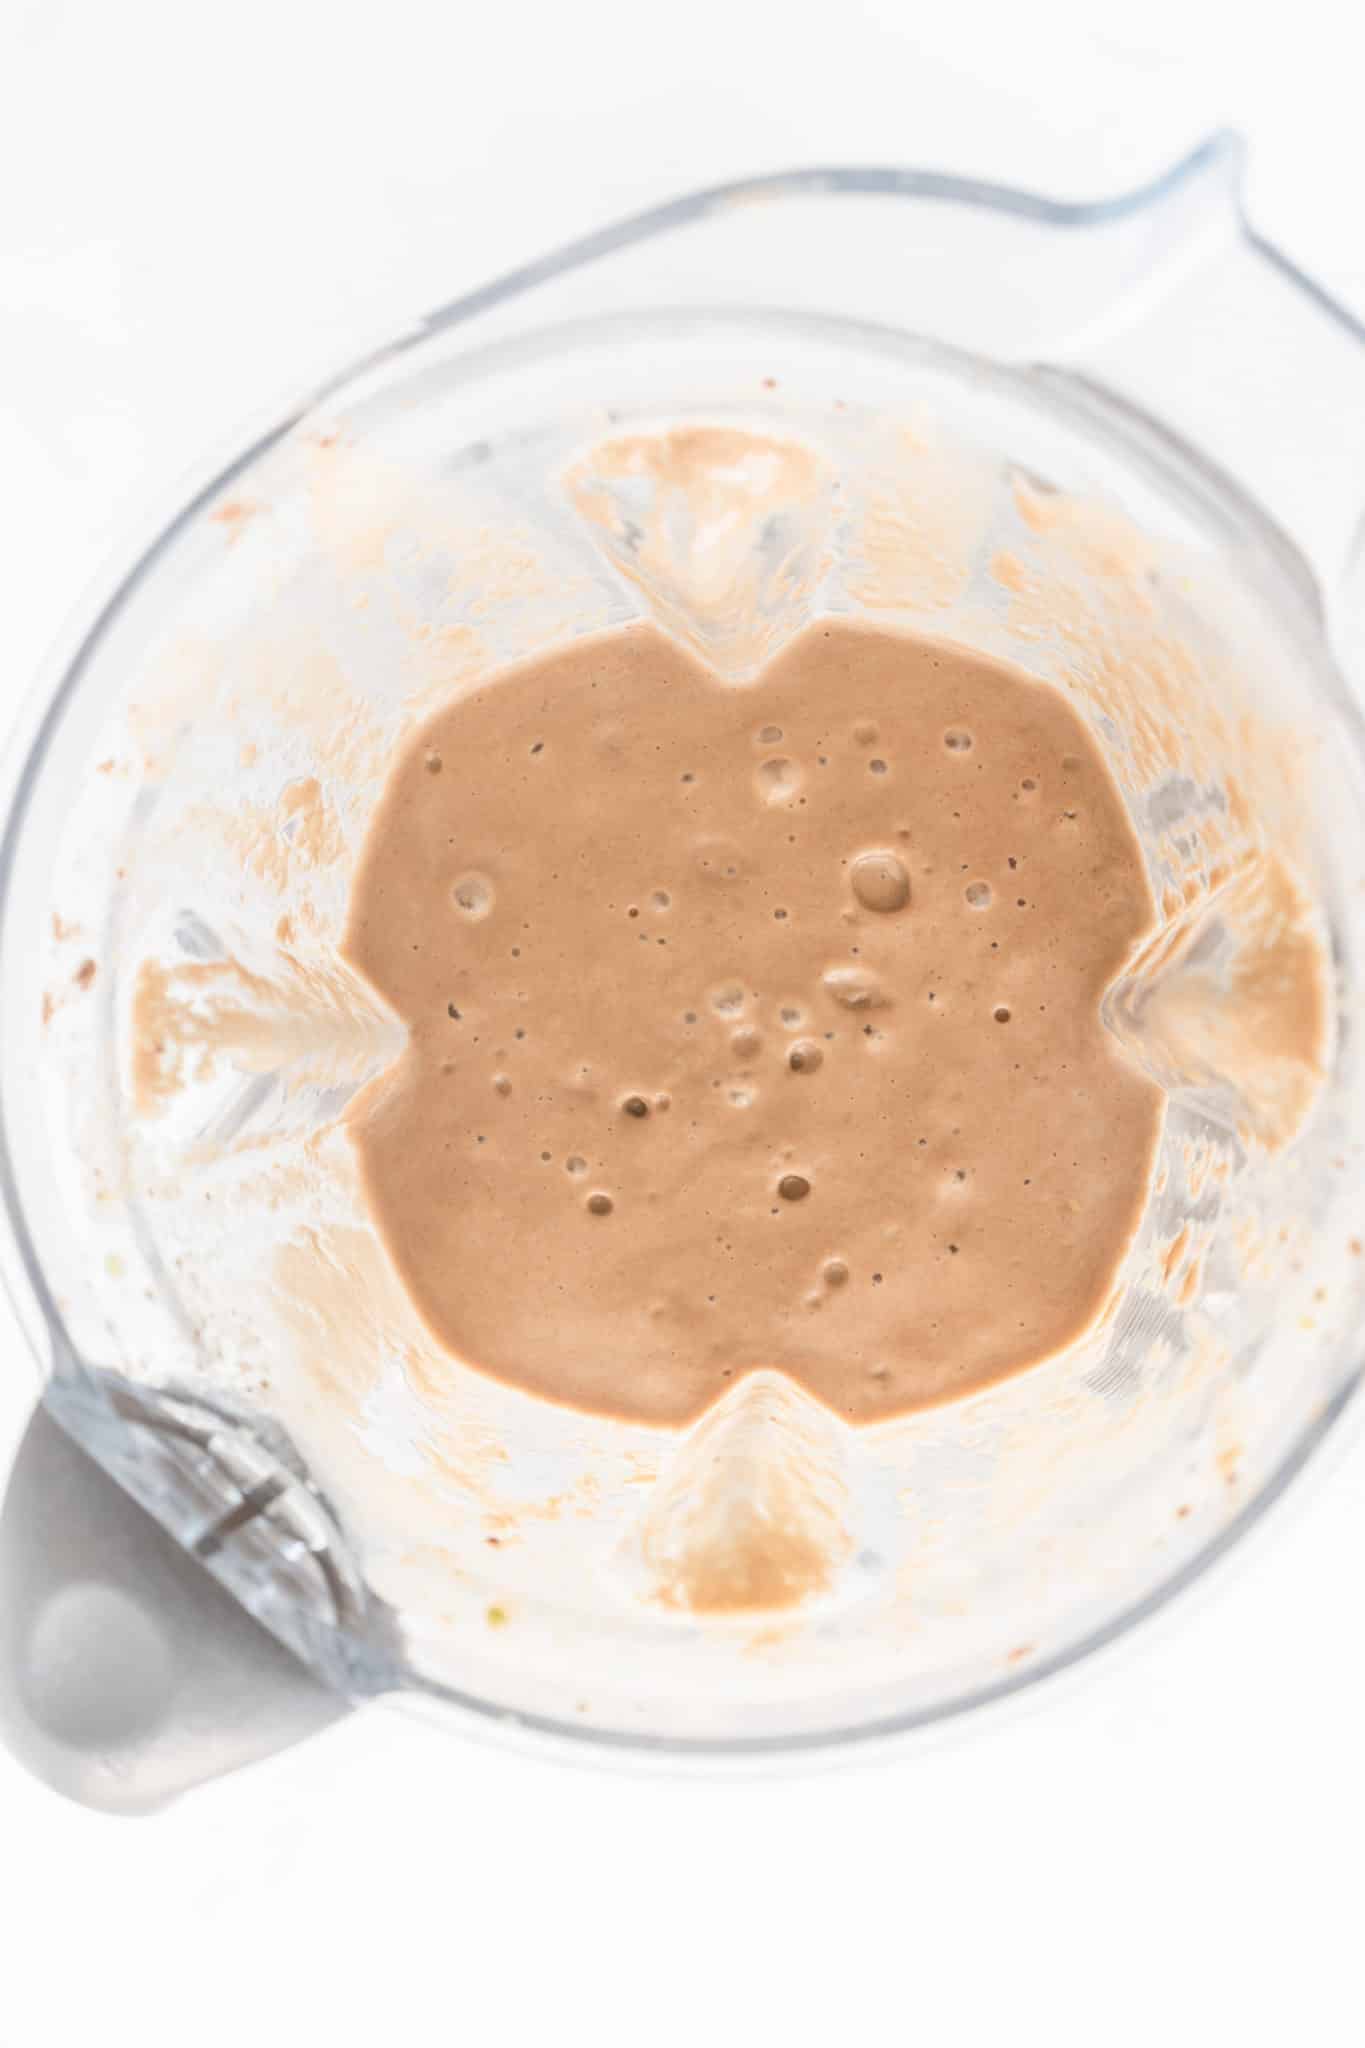 Chocolate smoothie in a blender